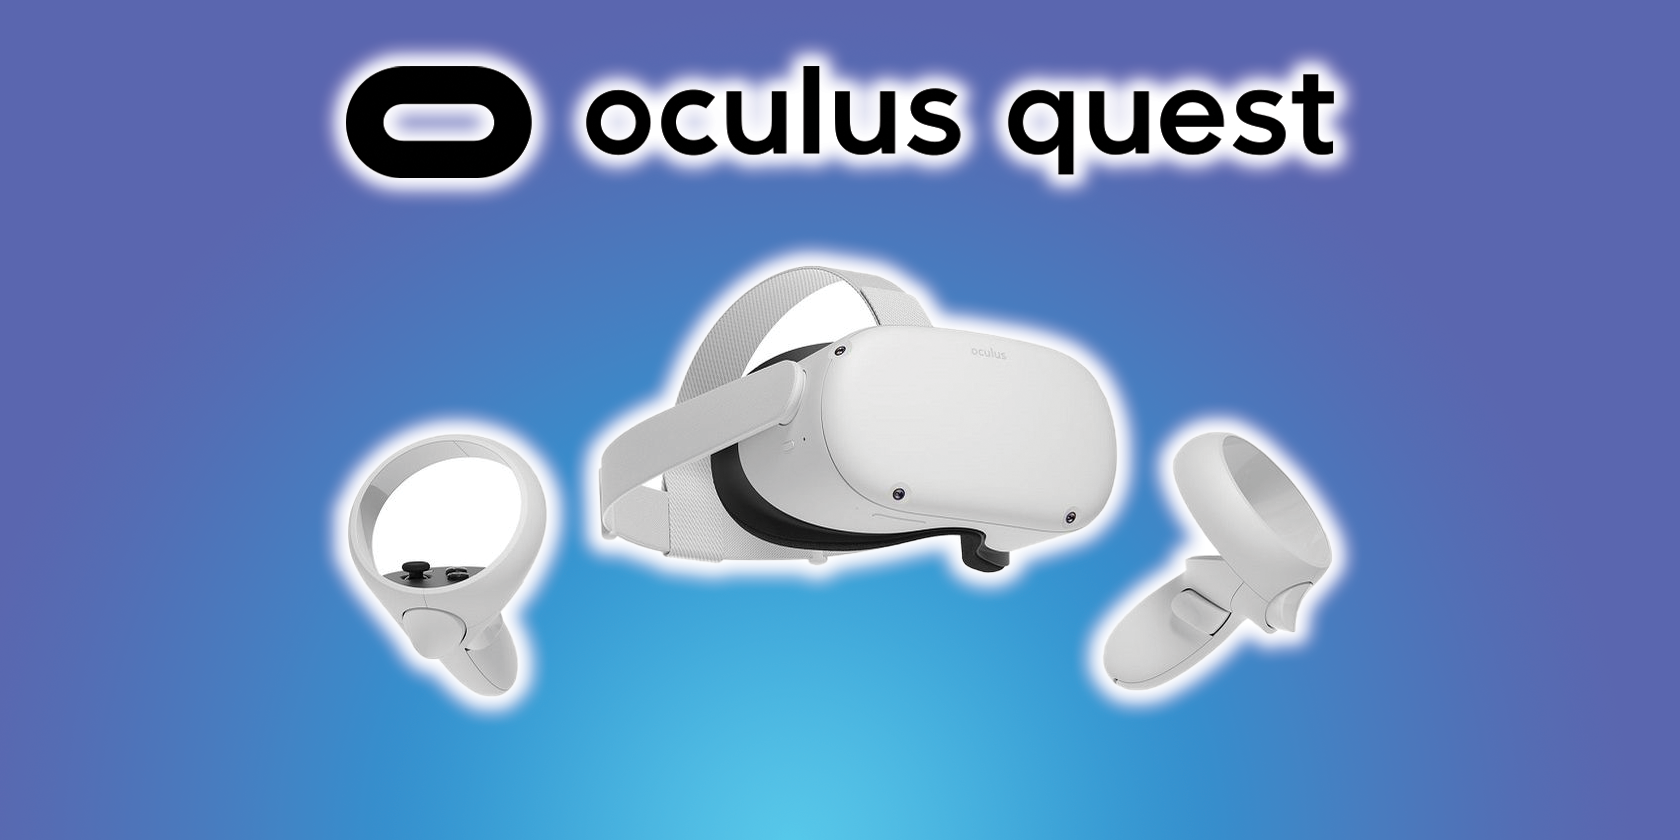 oculus quest 2 vr headset and controllers